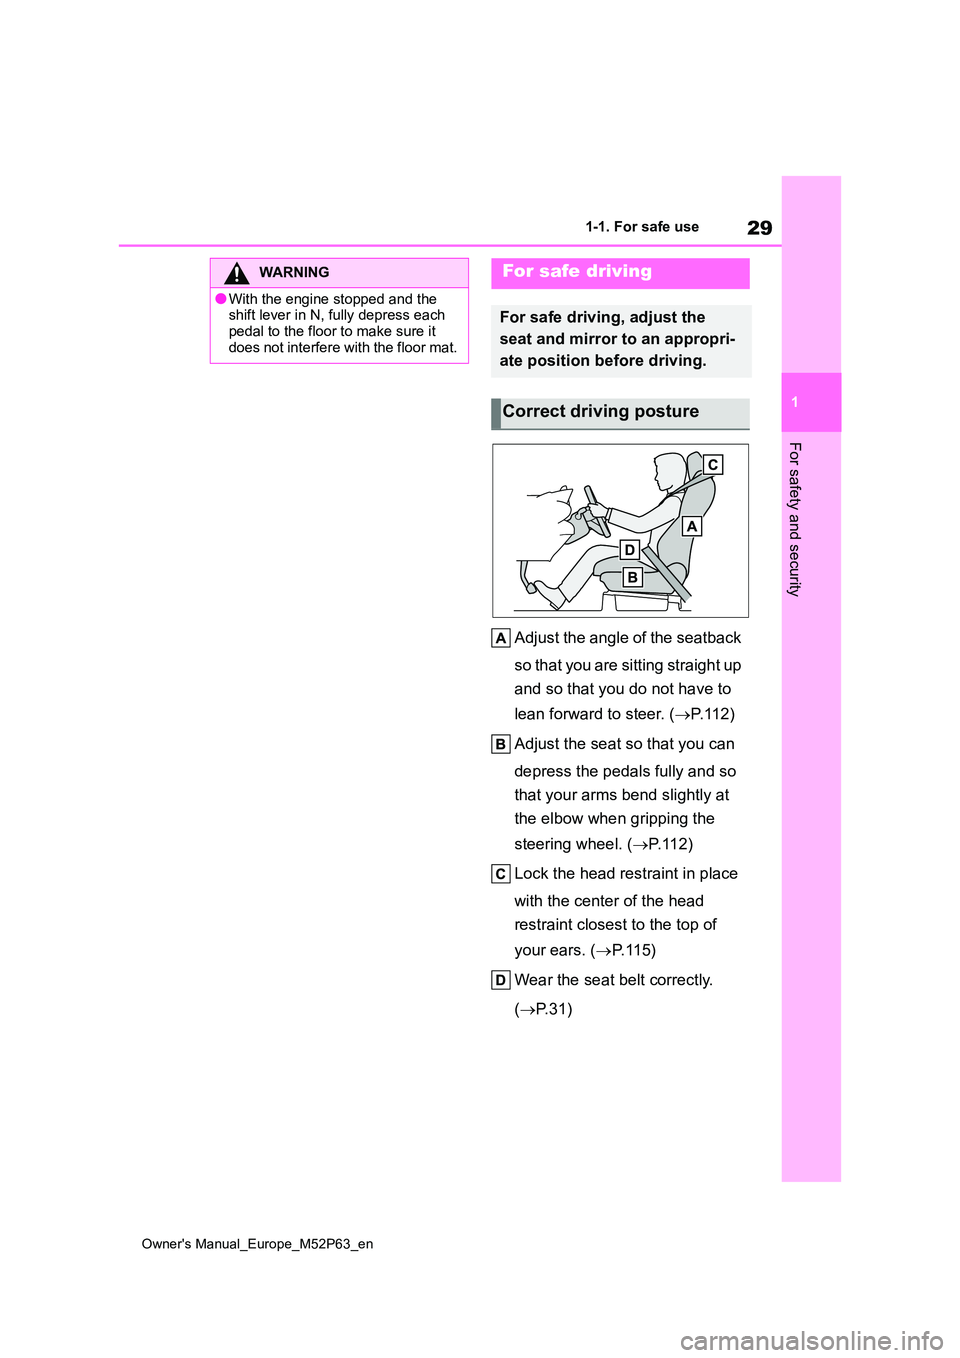 TOYOTA GR YARIS 2022  Owners Manual 29
1
Owner's Manual_Europe_M52P63_en
1-1. For safe use
For safety and security
Adjust the angle of the seatback  
so that you are sitting straight up  
and so that you do not have to  
lean forwar